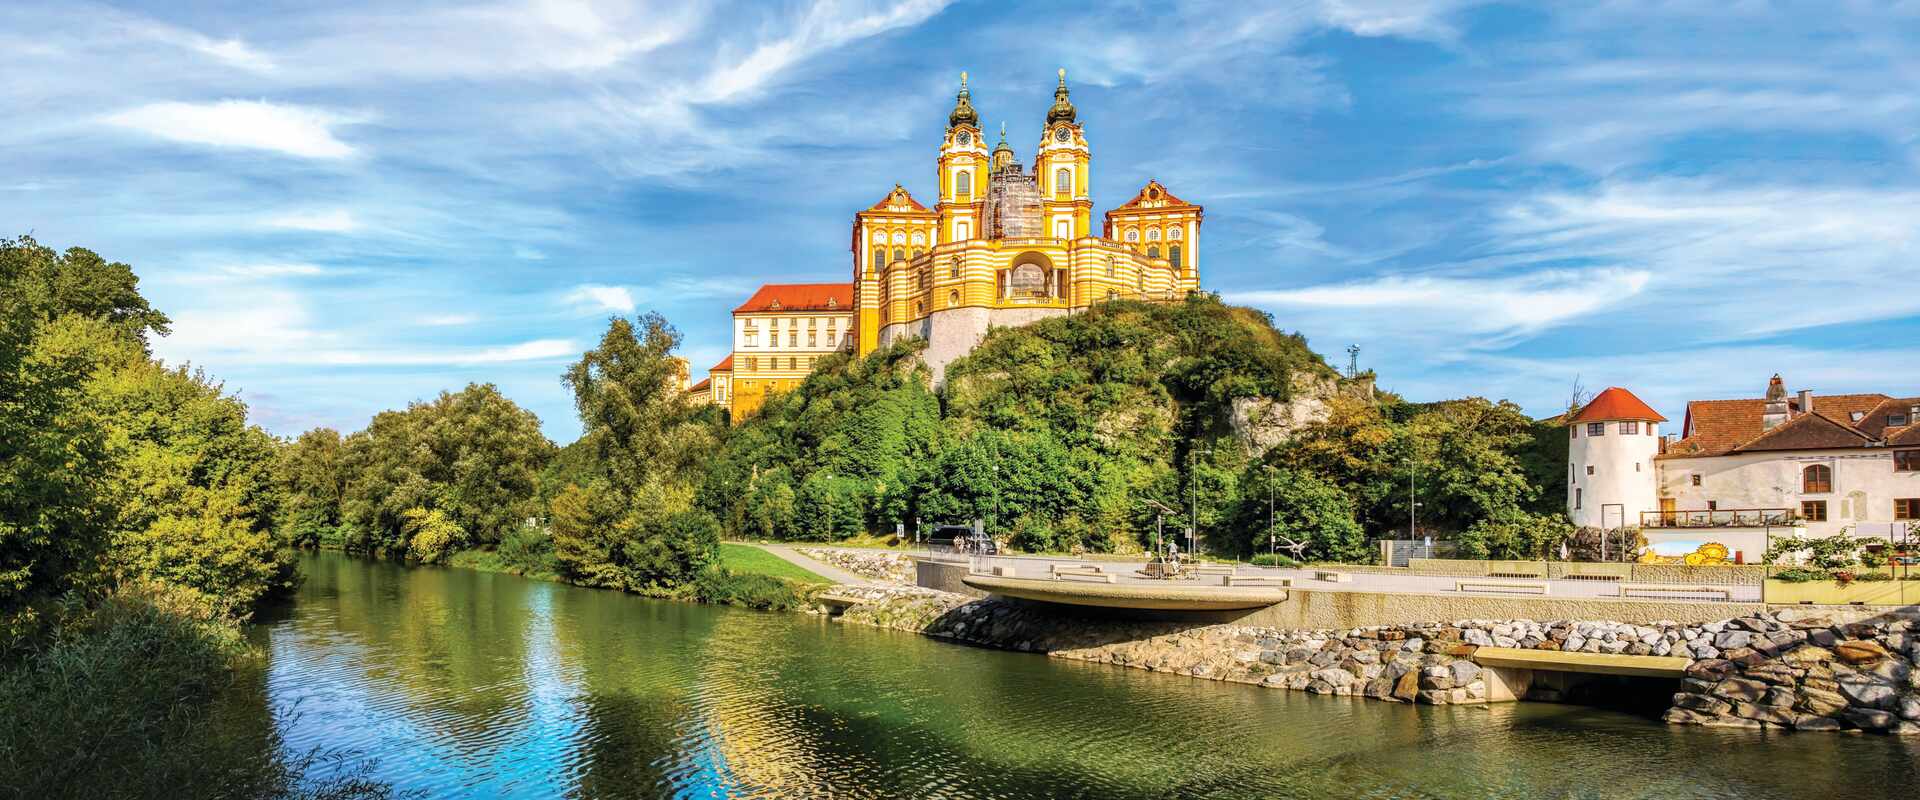 View of Melk abbey on hill infront of river, Austria